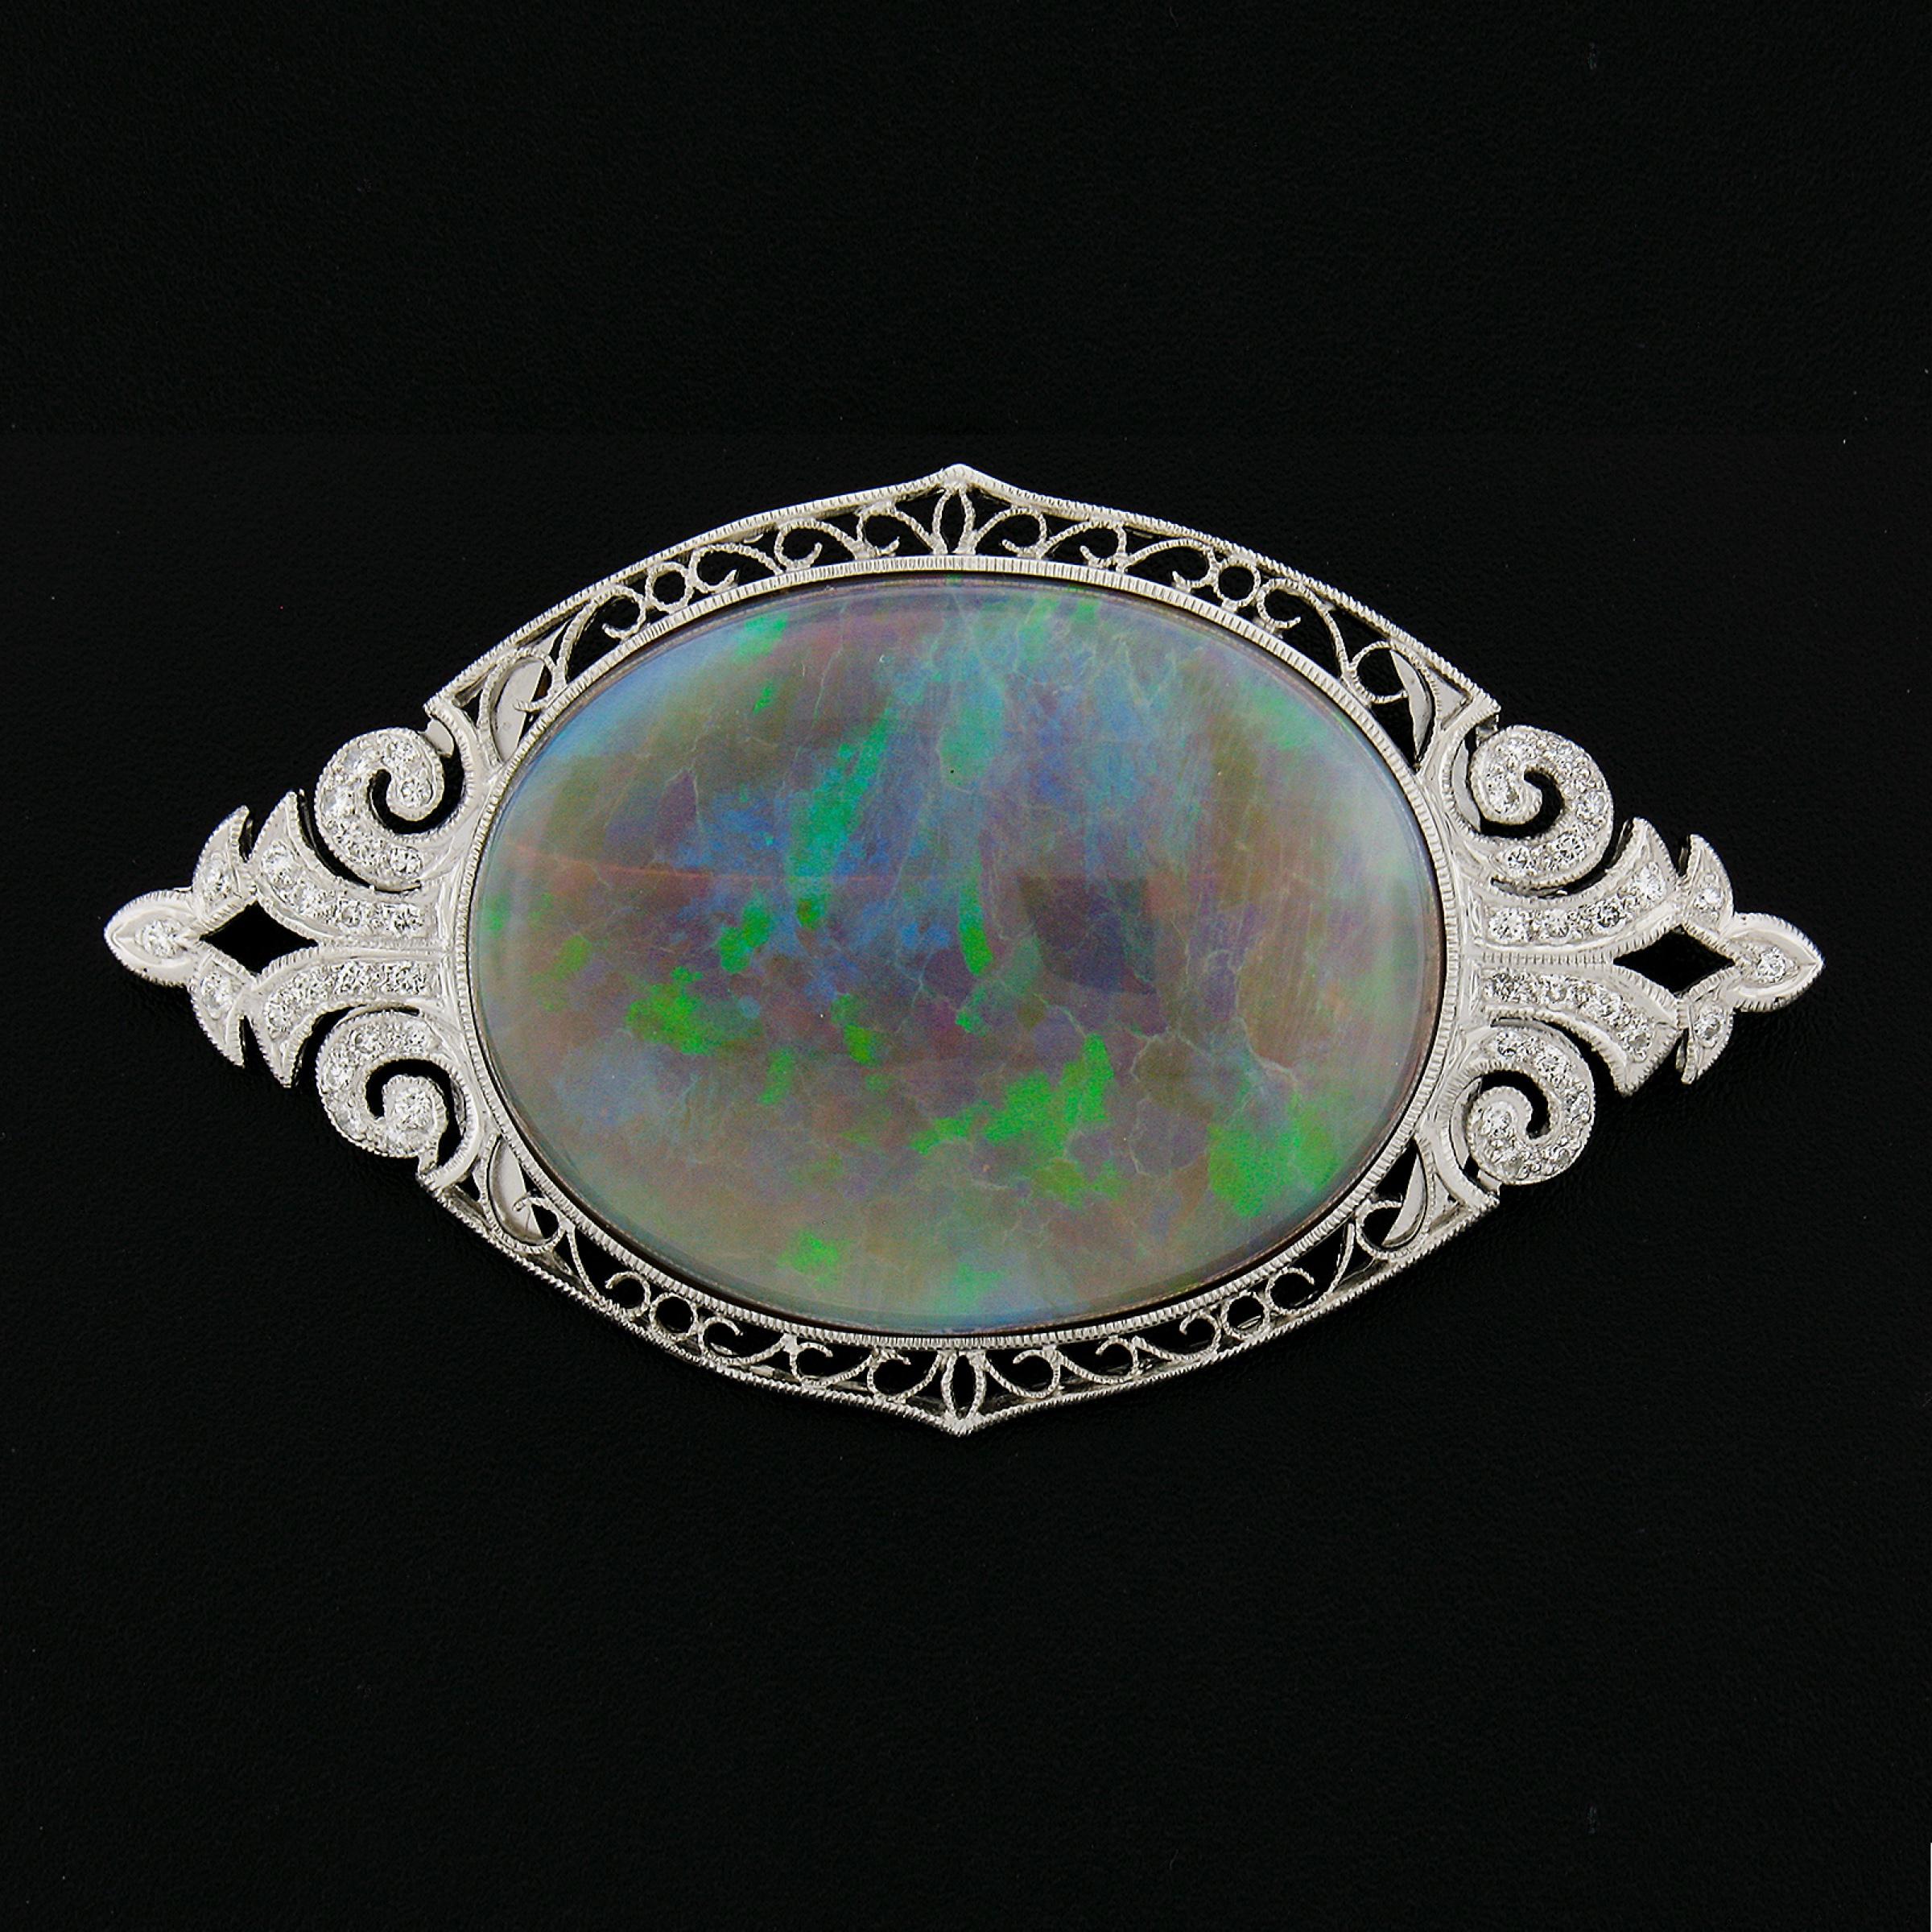 --Stone(s):--
(1) Natural Genuine Opal - Oval Cabochon Cut - Bezel Set - Gray Color w/ Play of Green, Blue, Orange, Purple  & Red (depending on light) - 61ct (approx. based on measurement. )
**See Certification Details Below For More Info**
(46)